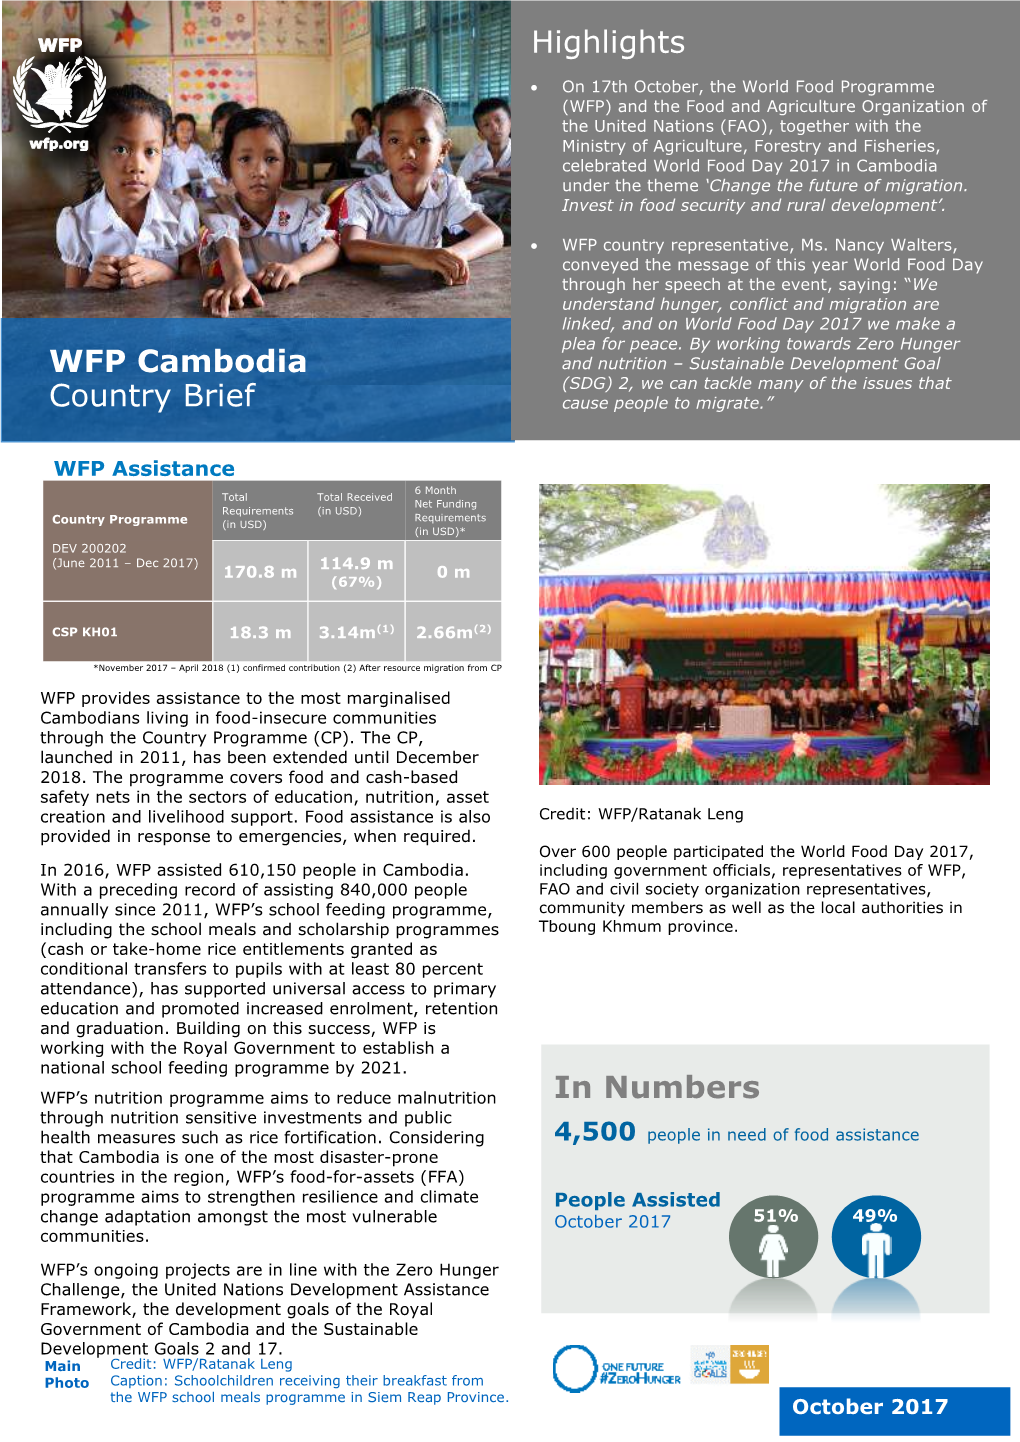 WFP Cambodia Country Brief Highlights in Numbers